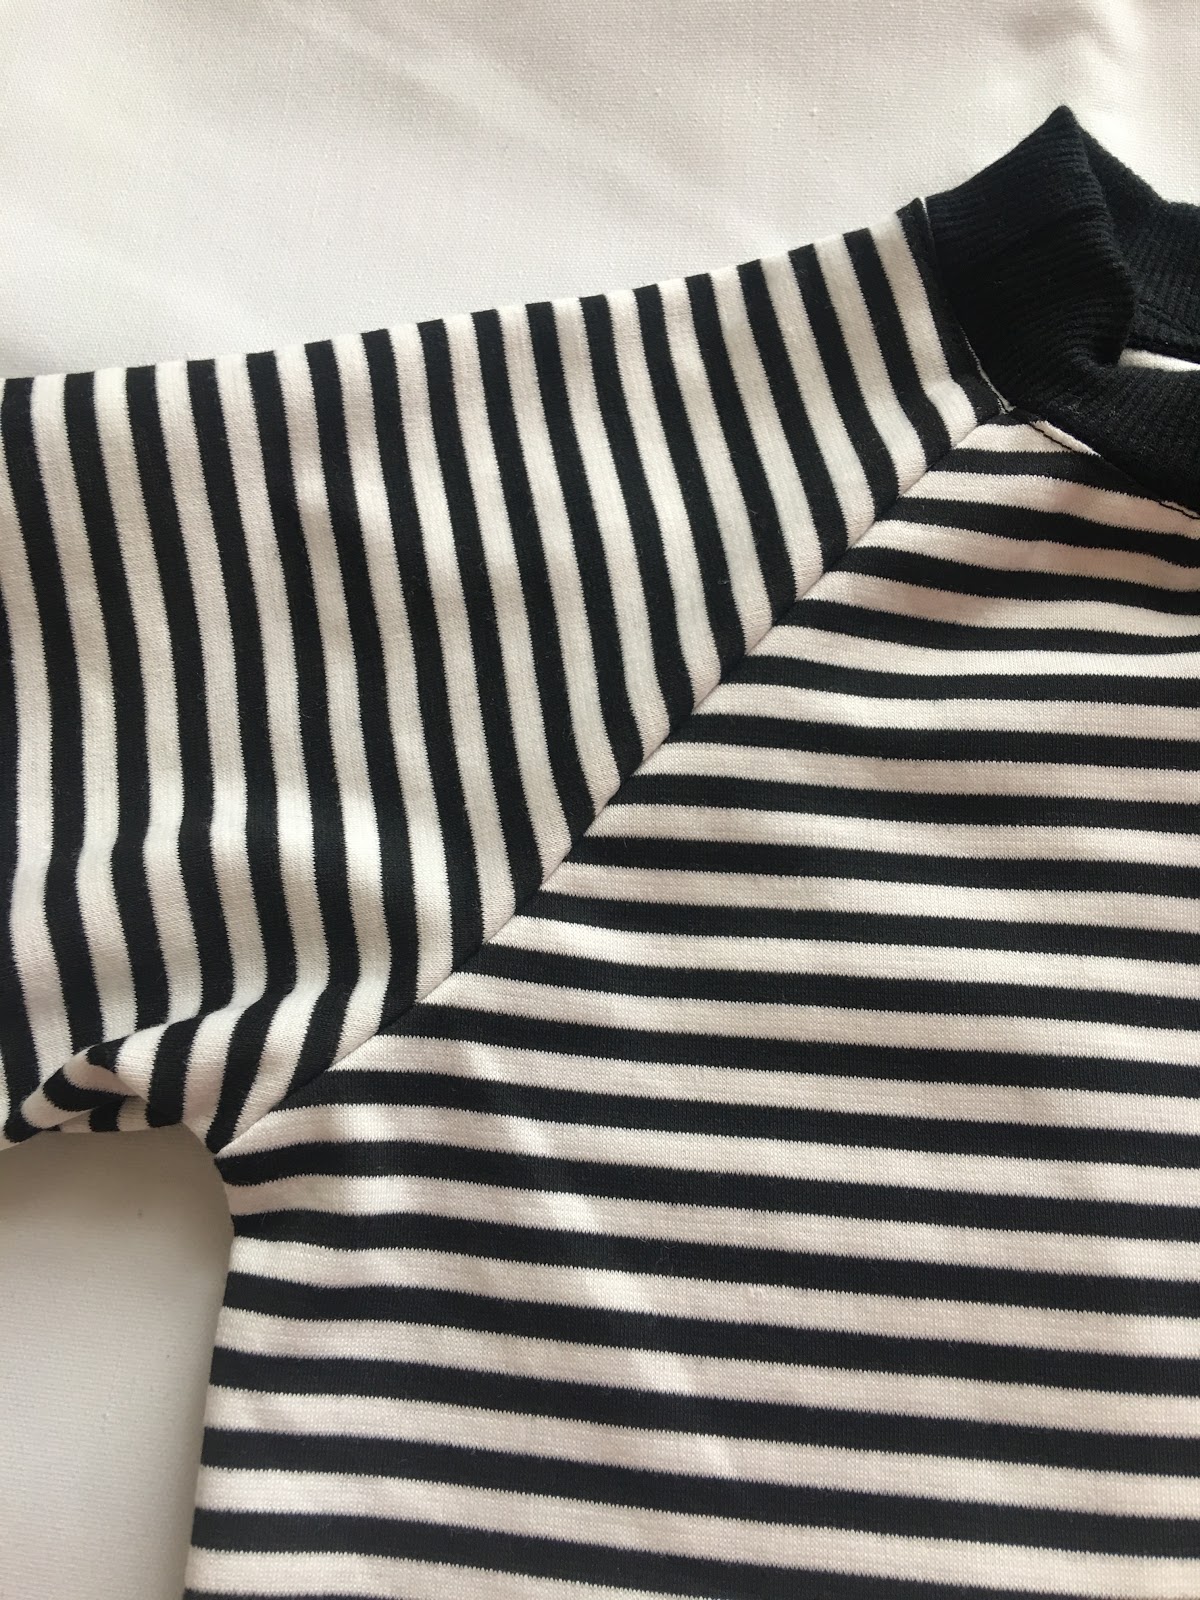 How to work with stripes